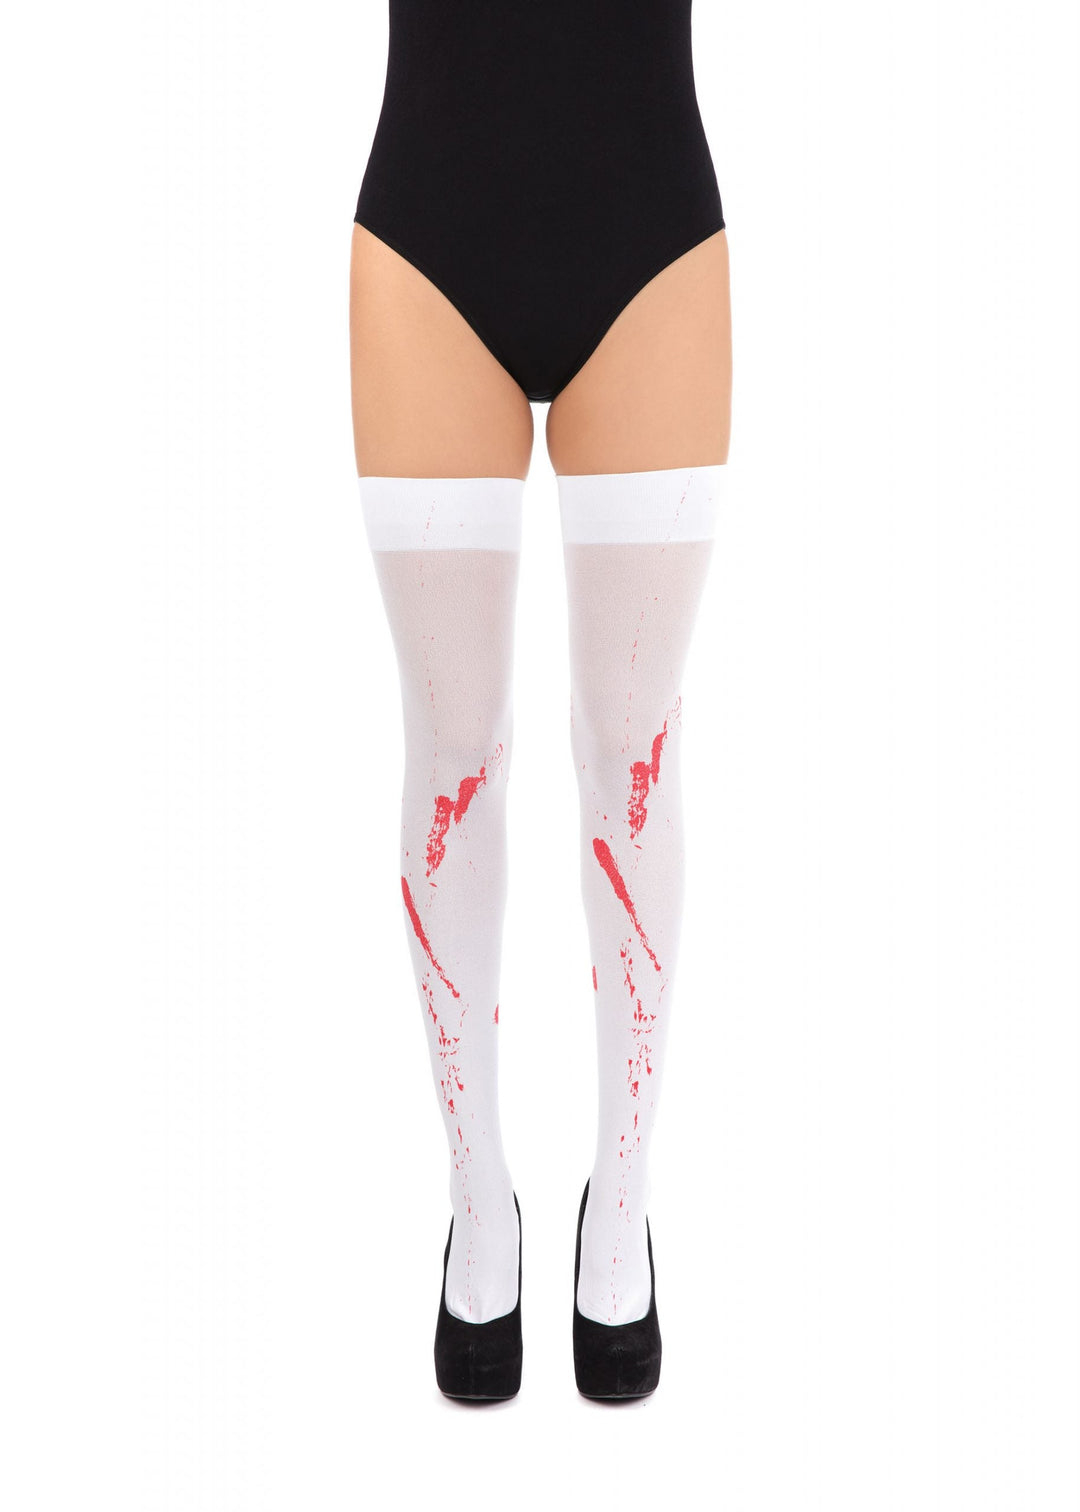 White Stockings with Blood Stain Costume Accessory_1